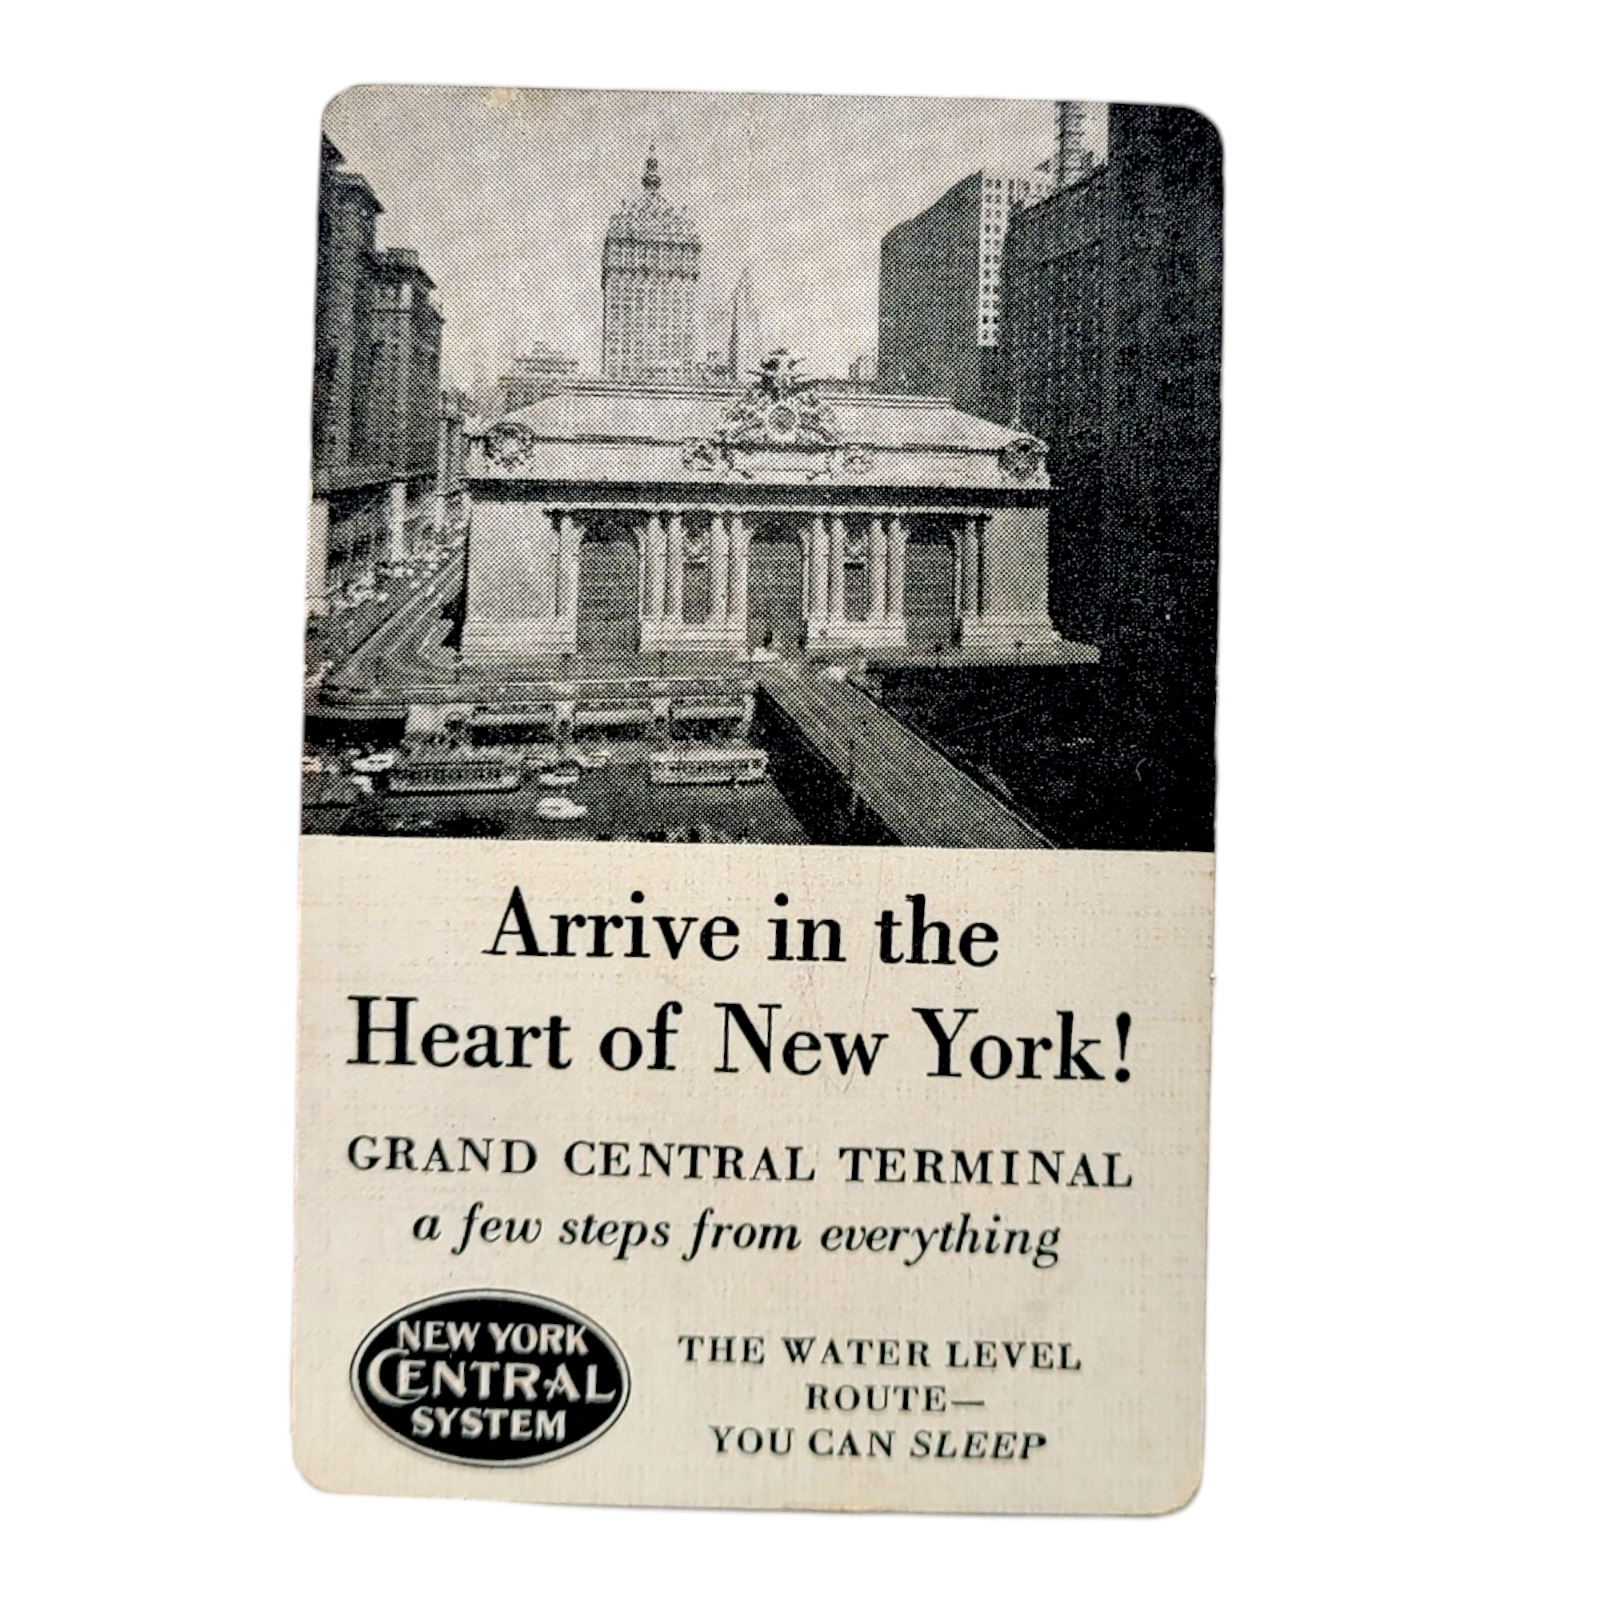 RARE New York Central System Railroad Grand Central Advertising Card Vintage